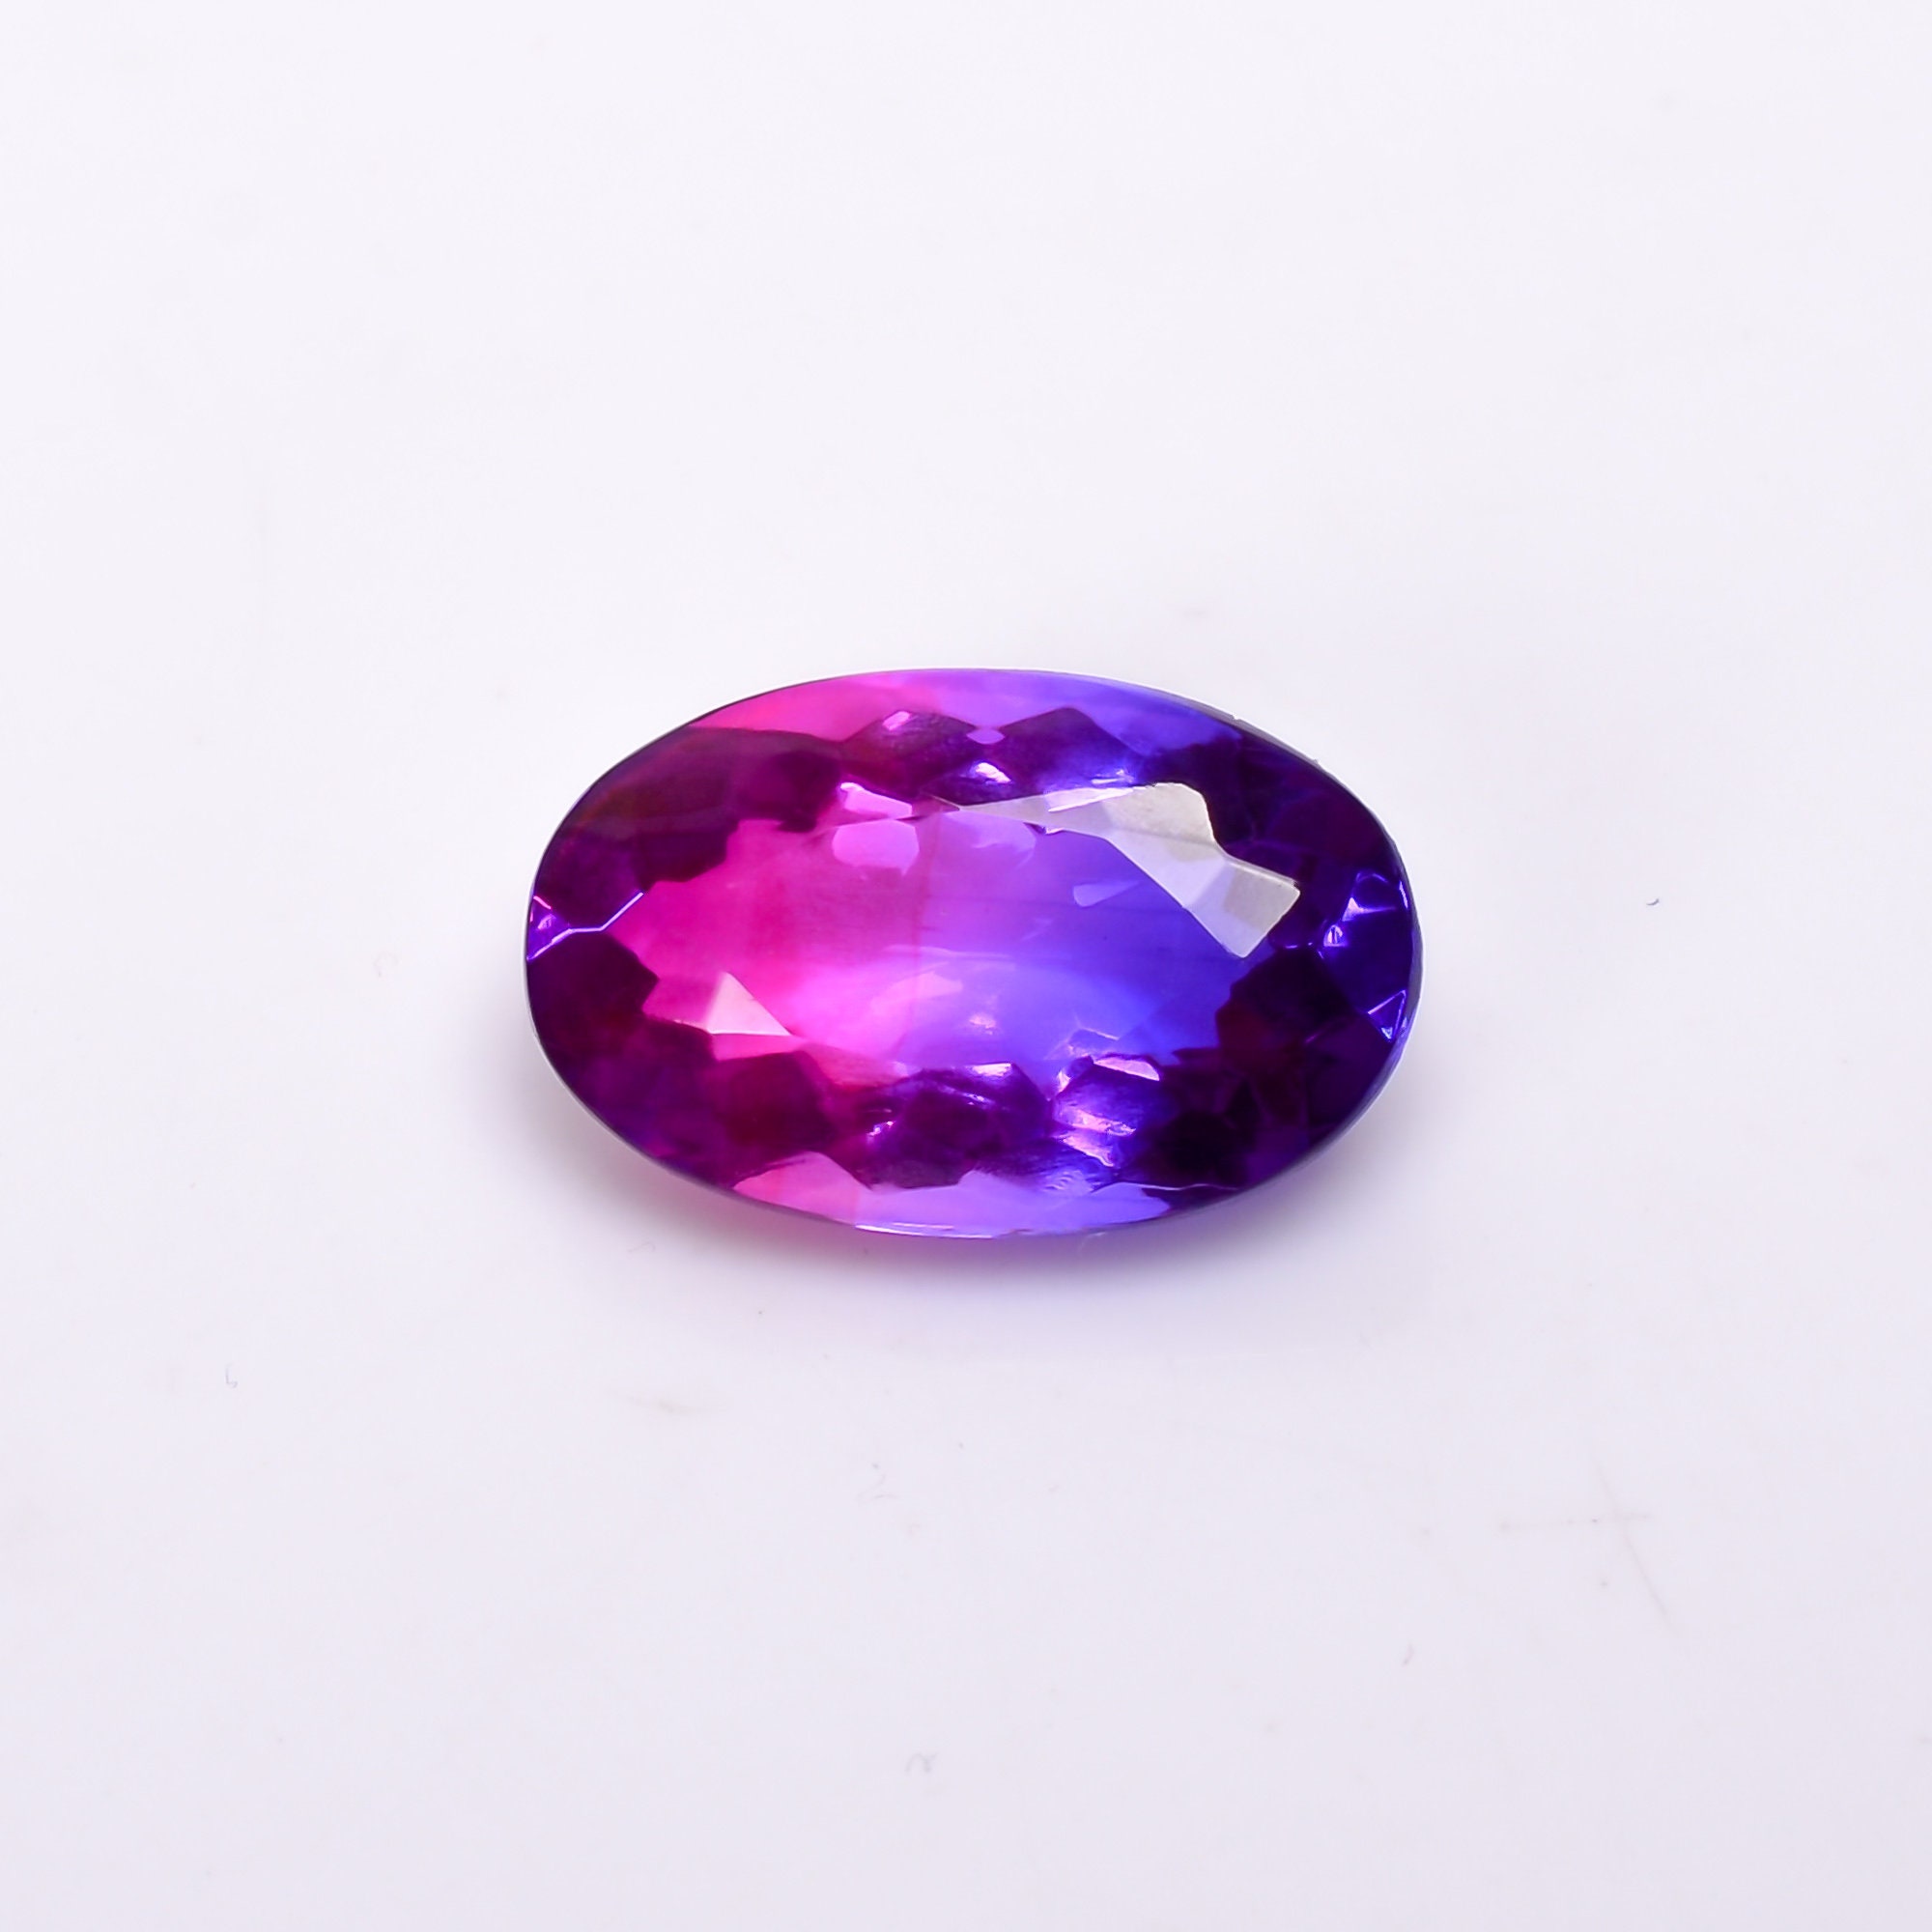 Classic Bio Color Tourmline Crystal Doublet Oval Shape Cut Stone Loose Gemstone For Making Jewelry 35X20X11 mm R-6216 45 Ct